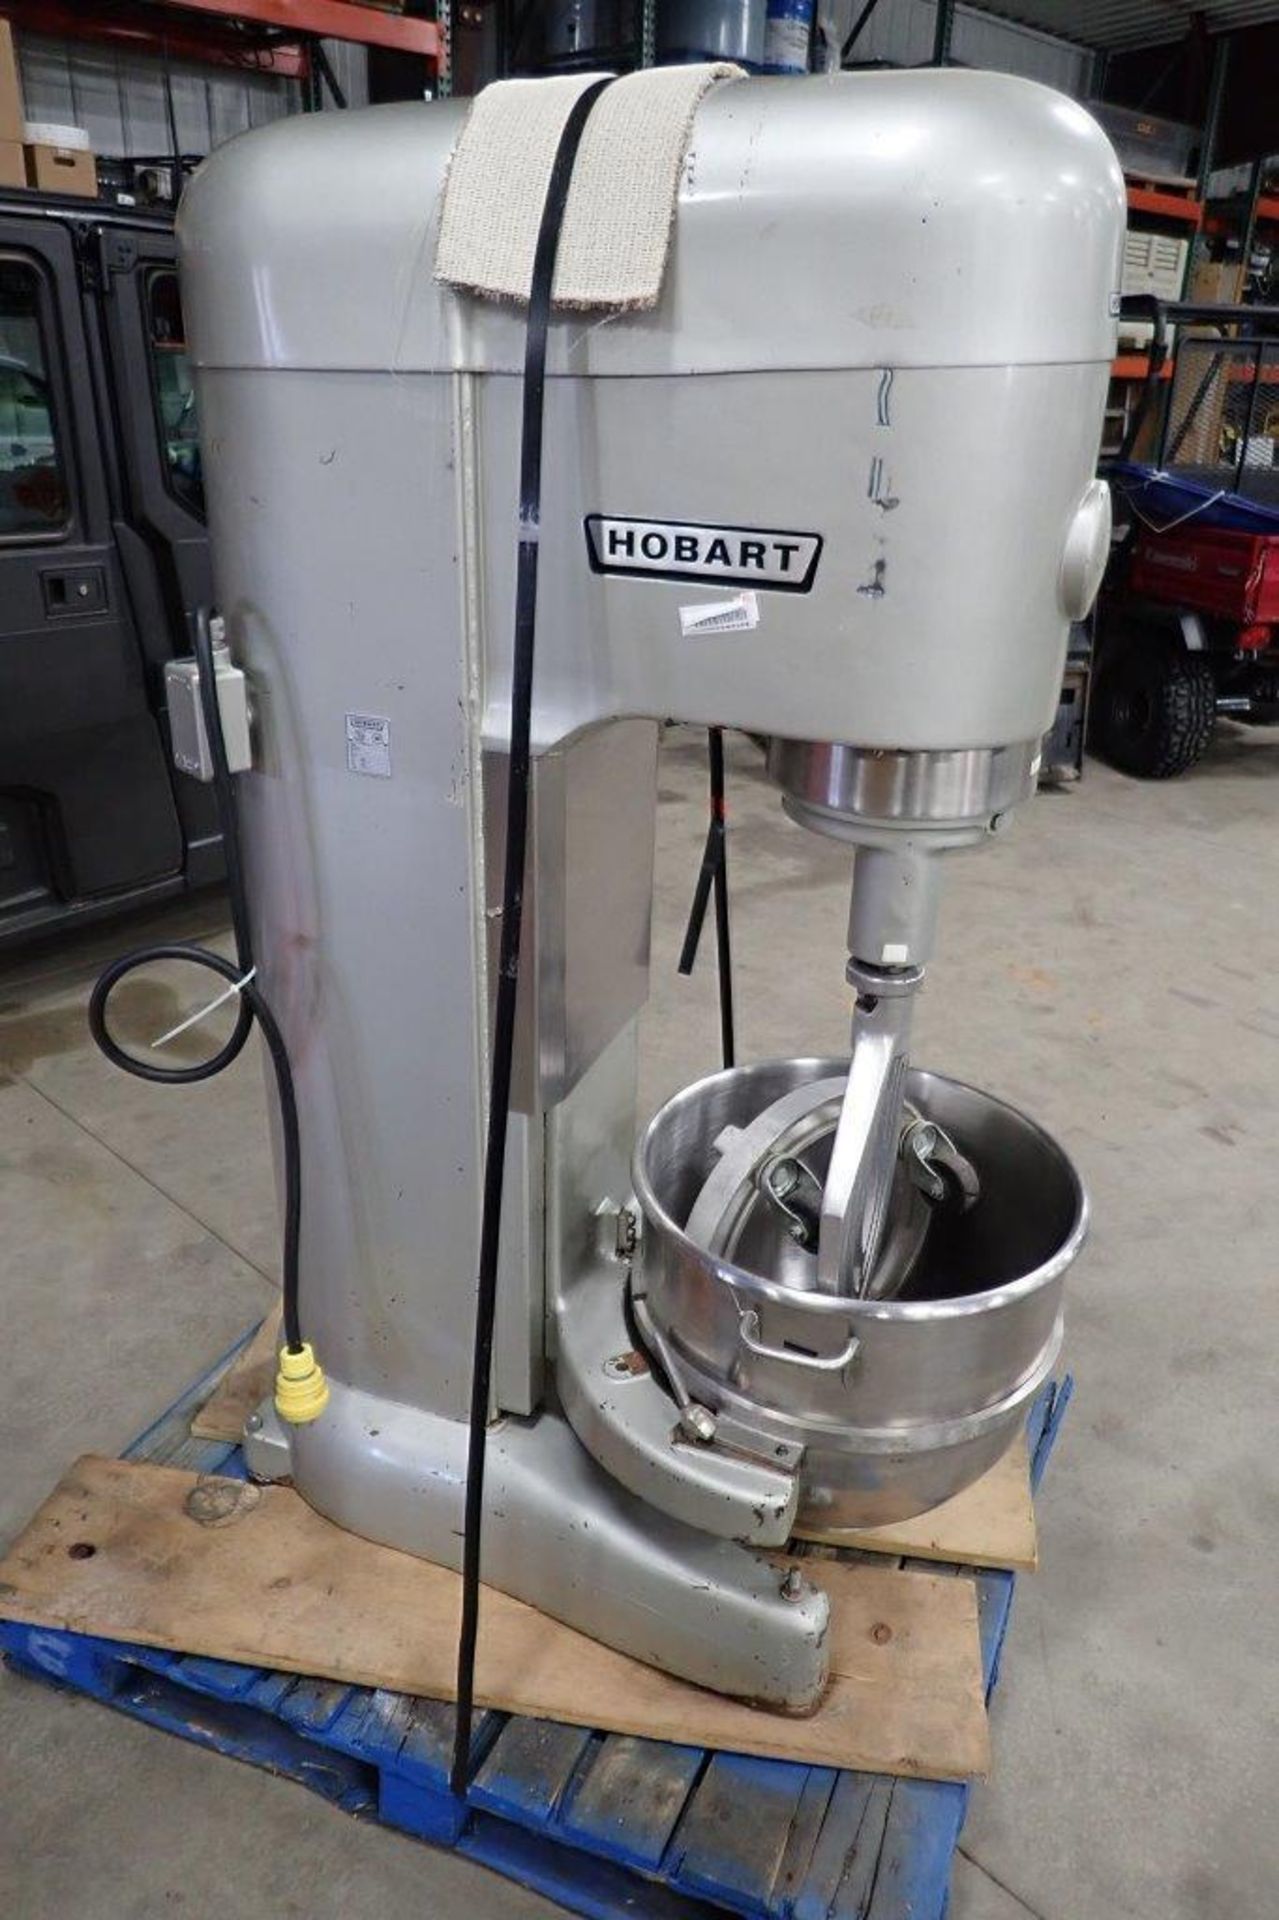 Hobart 80 qt mixer, Model M-802, SN 11-183-405, with SS bowl, 2 bowl dollies, beater attachment (Loc